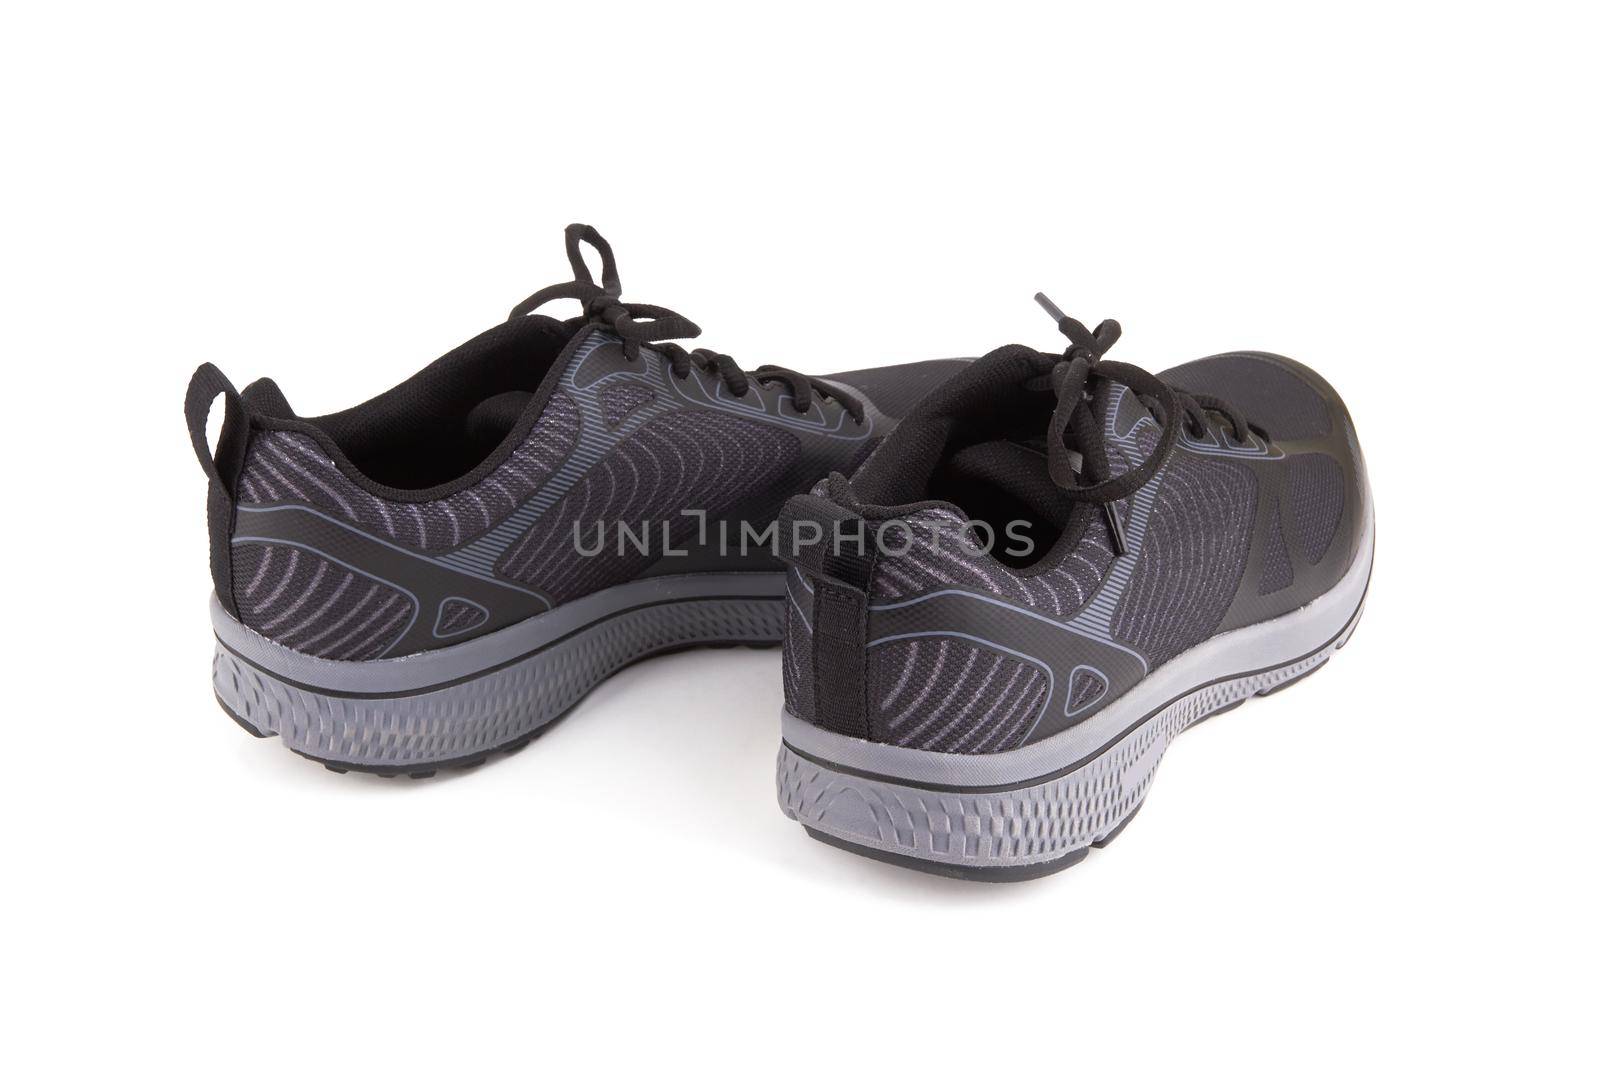 Gray sneakers isolated on a white background